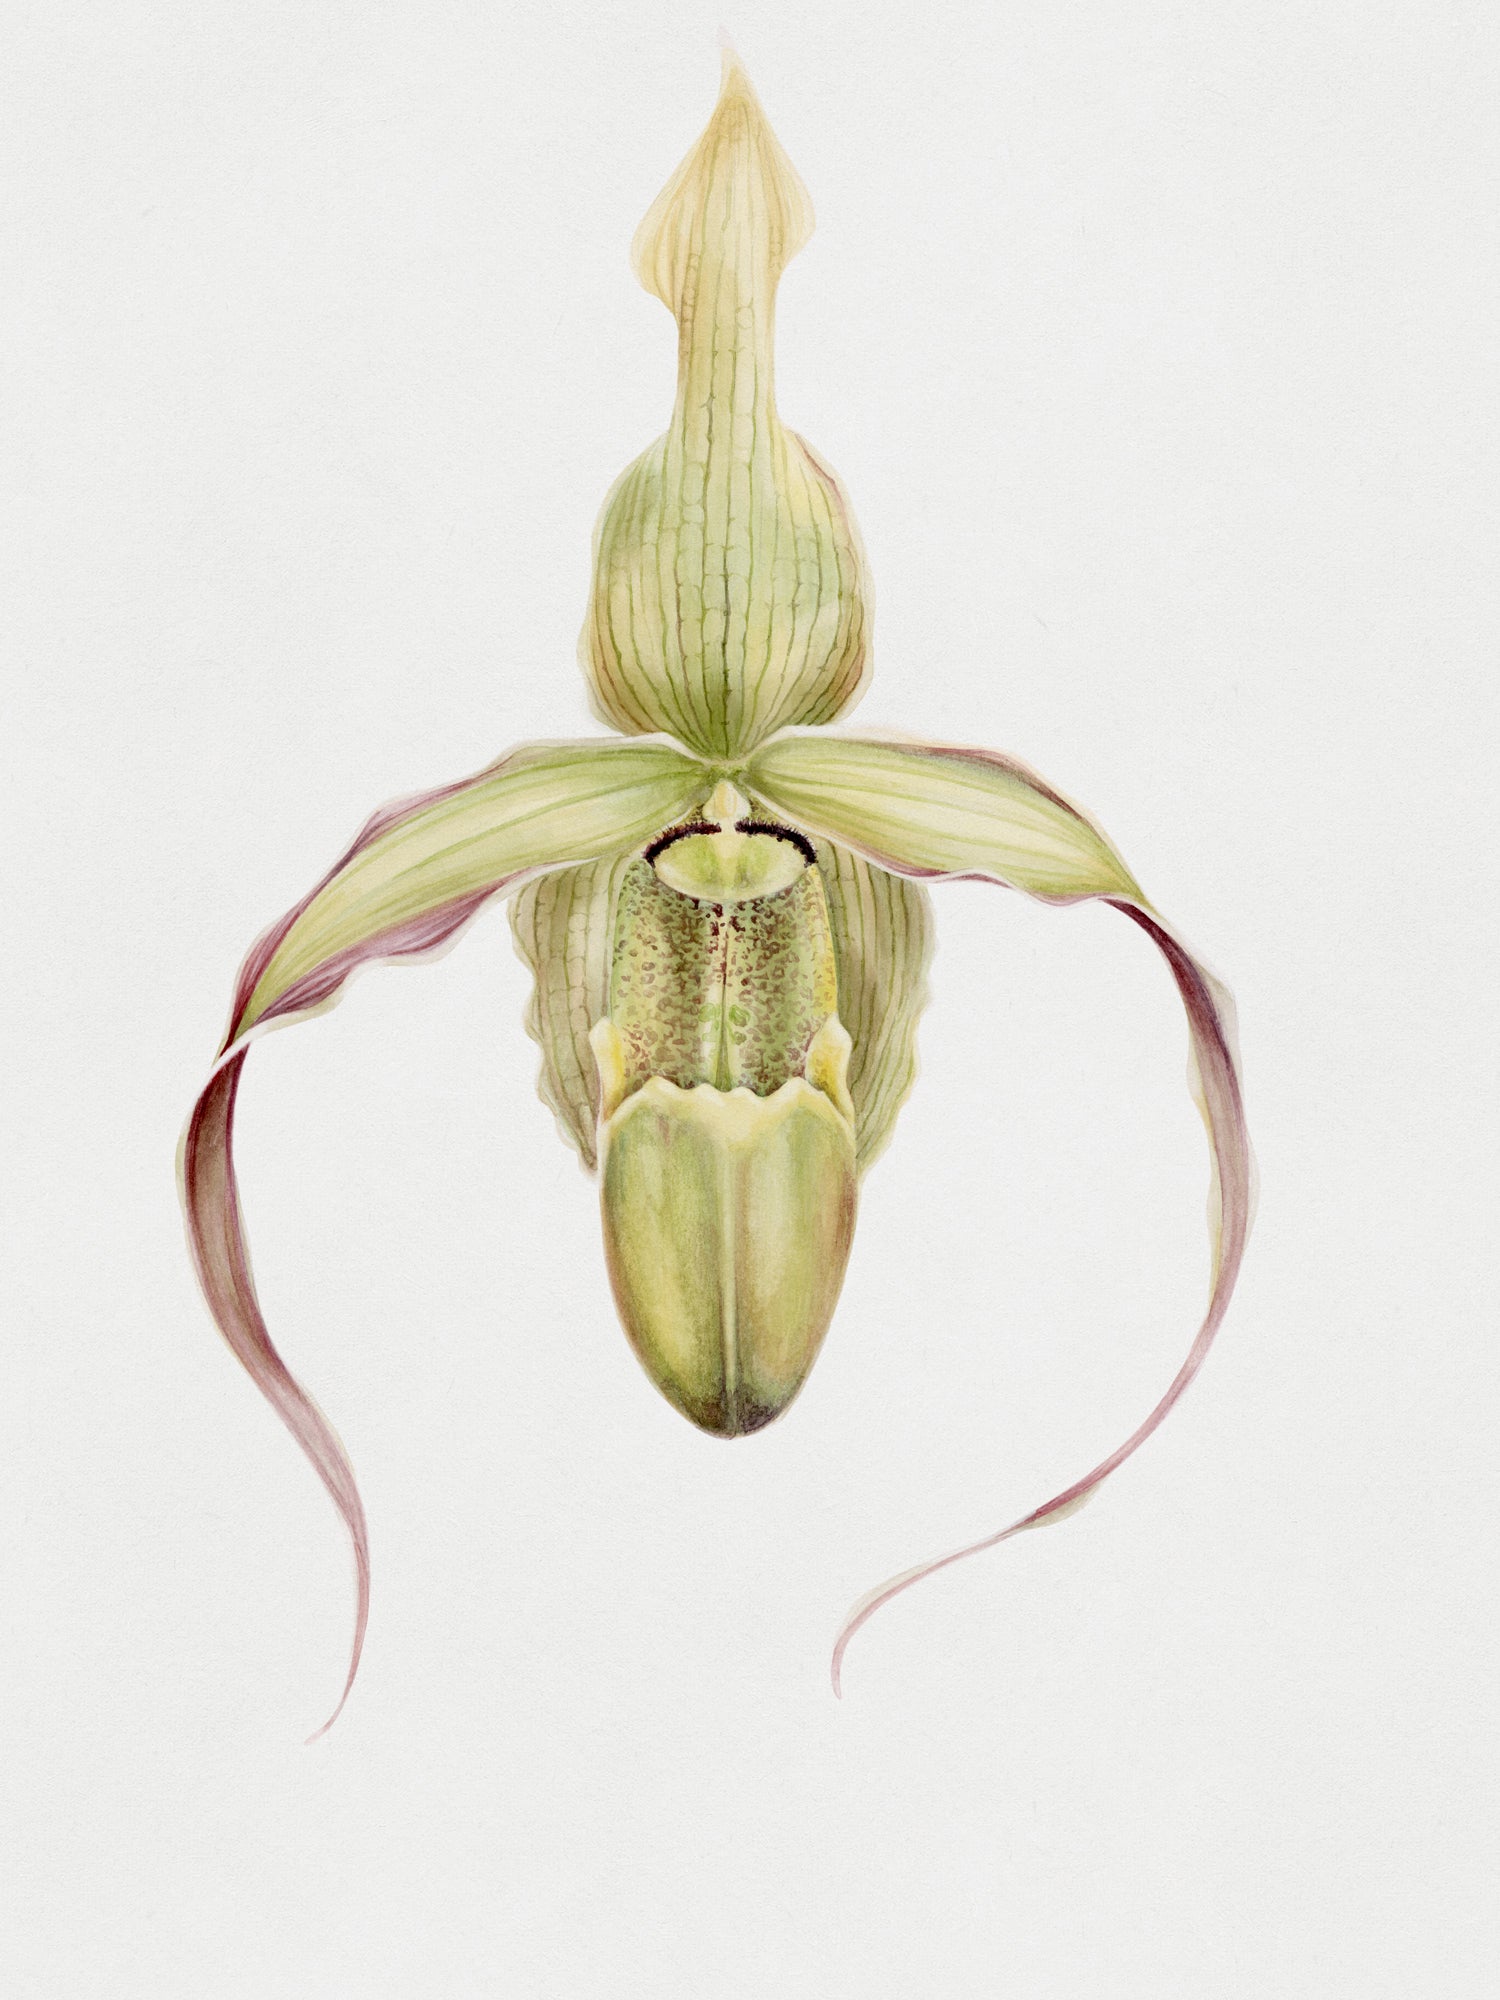 botanical illustrations of orchids in watercolor by wildlife artist antonia reyes montealegre